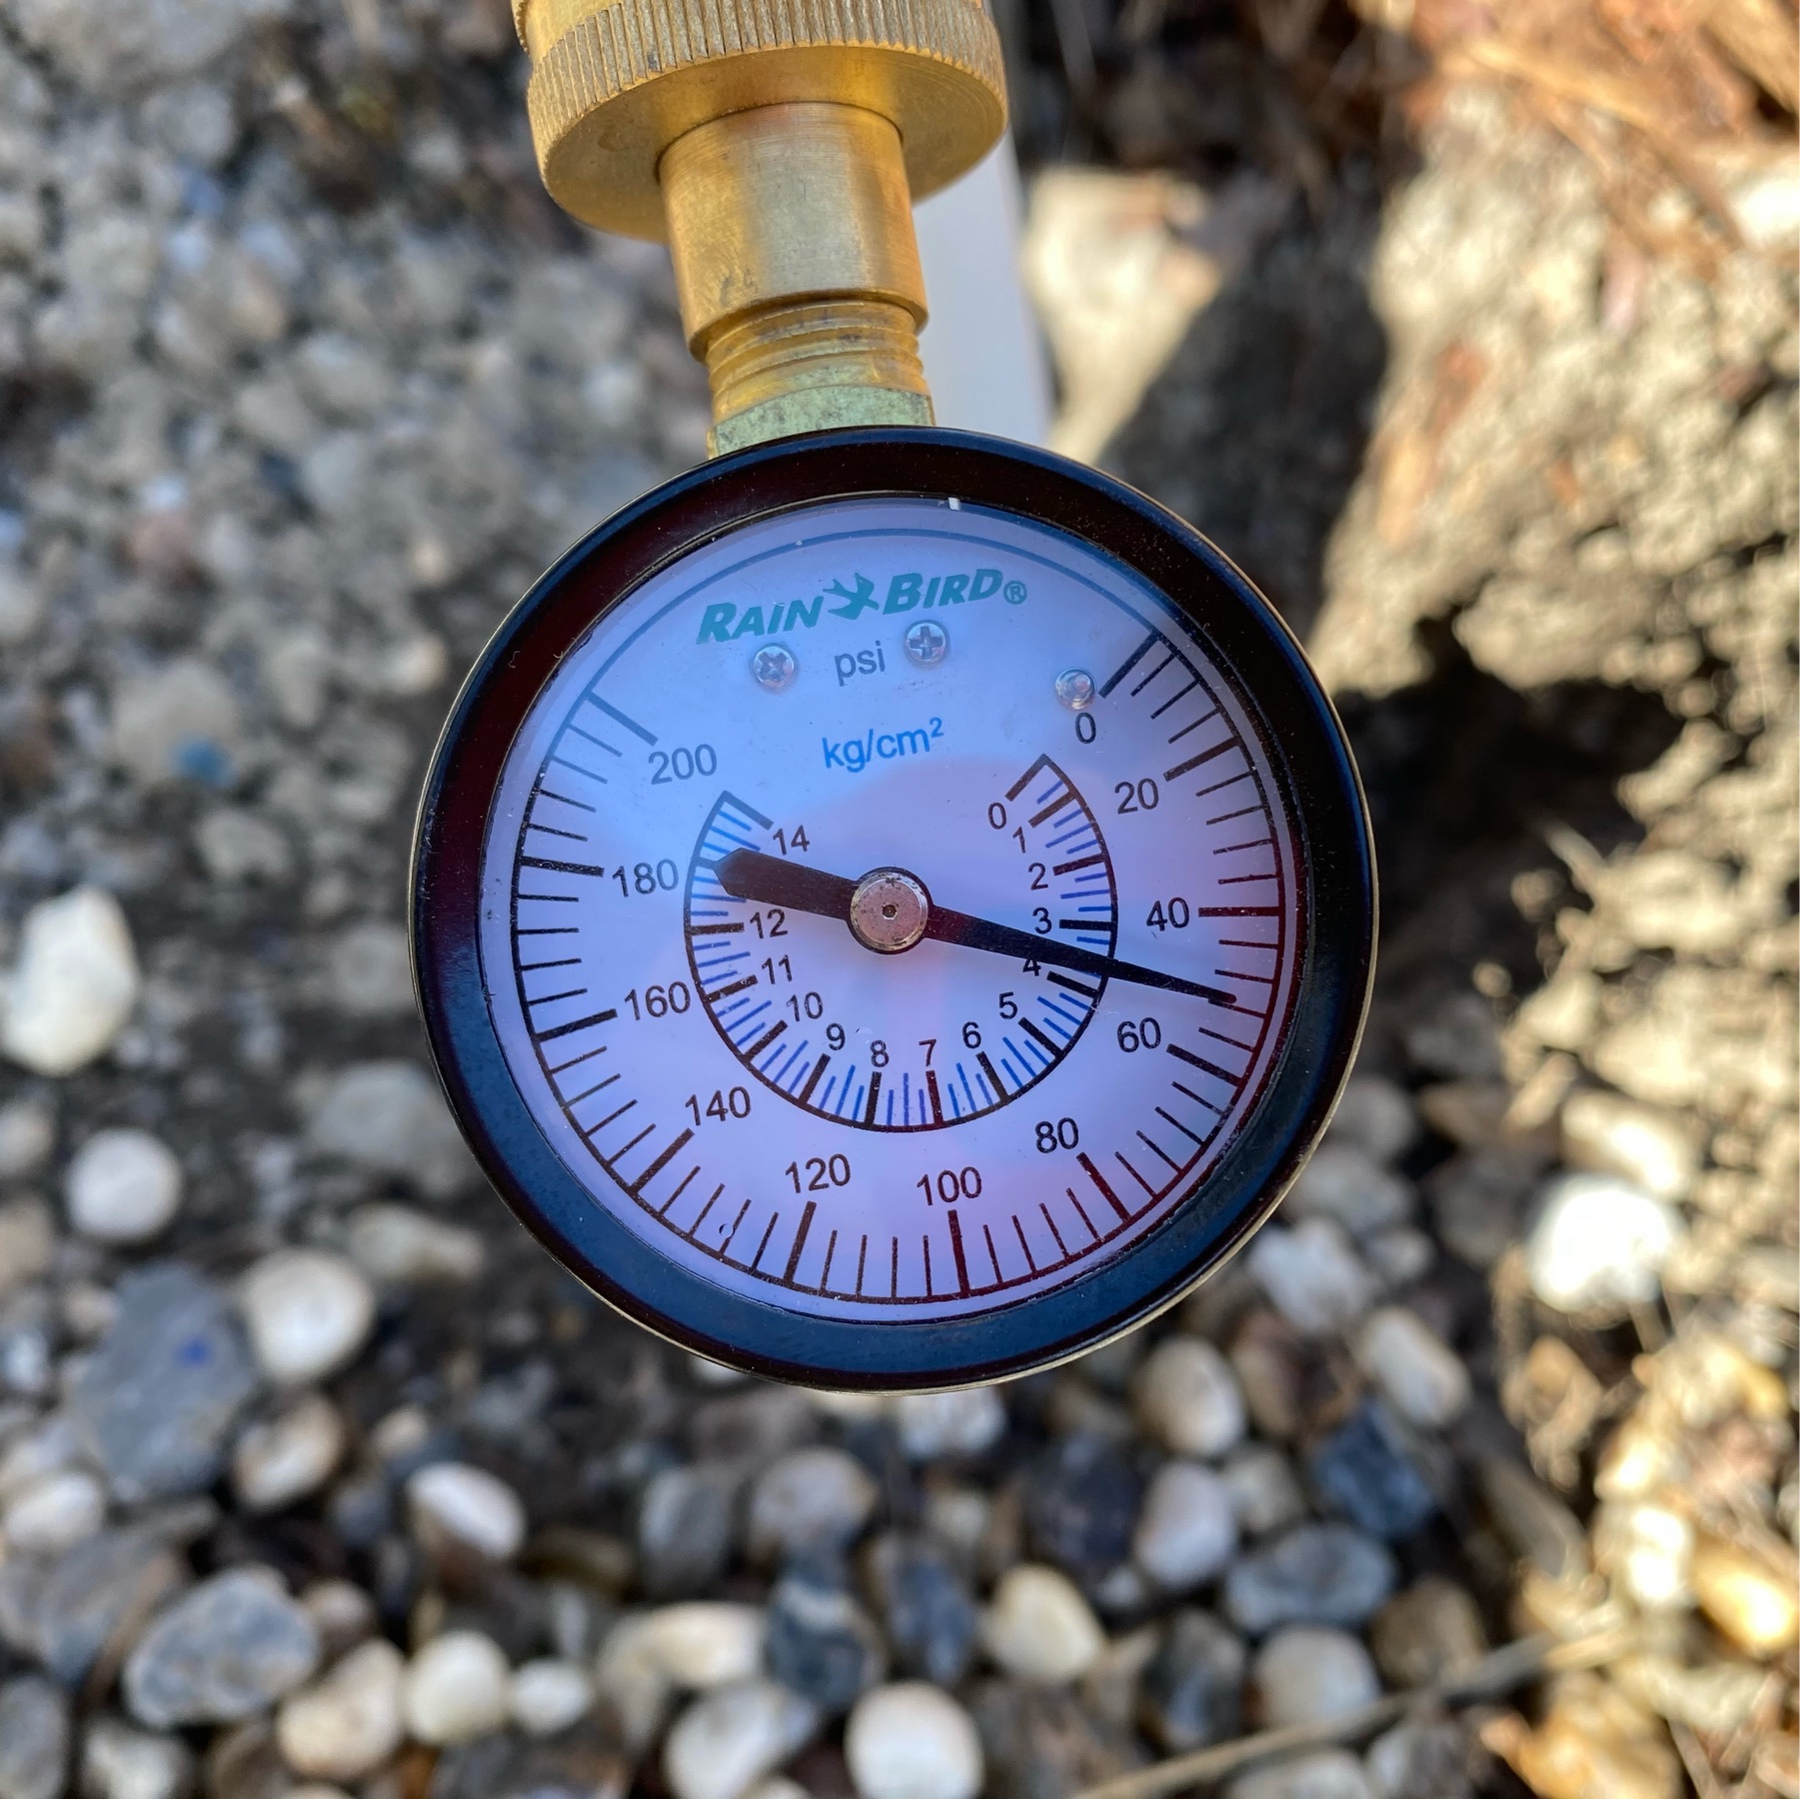 pressure gauge showing a reading of about 50 PSI.